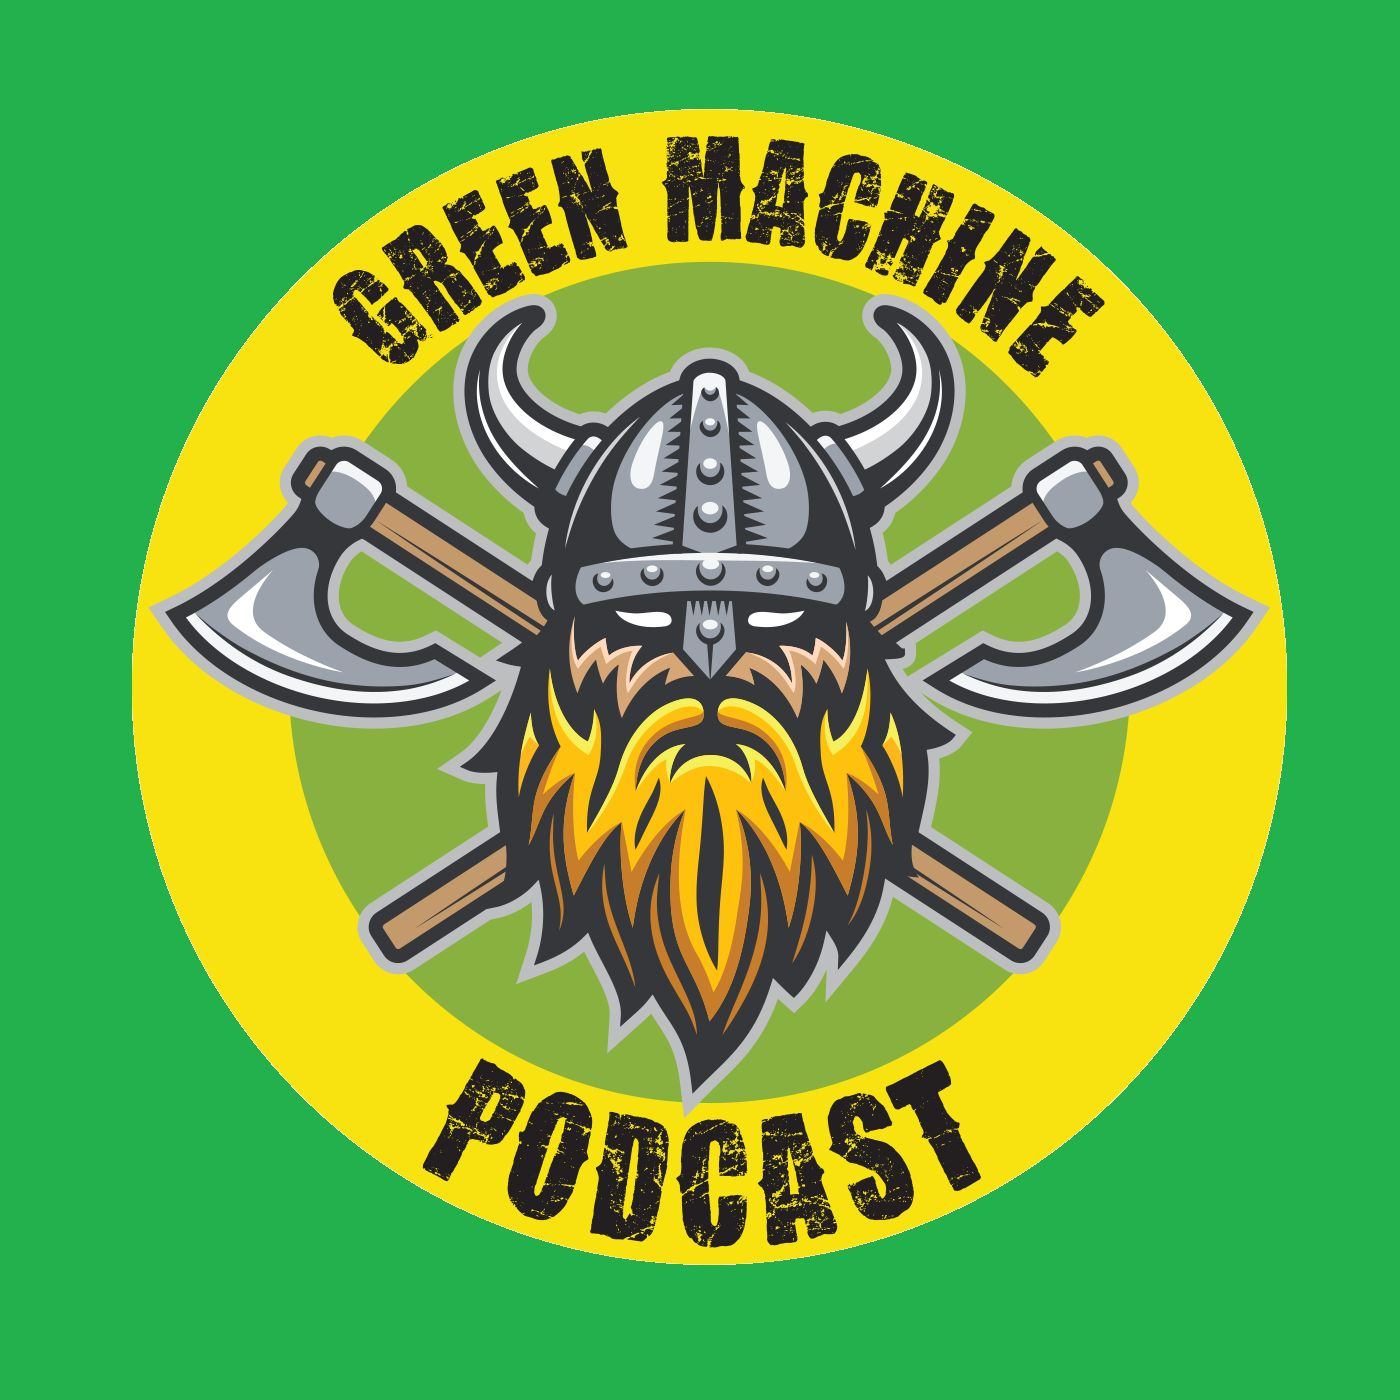 Green Machine Podcast - Episode 179 - The 2021 M Awards